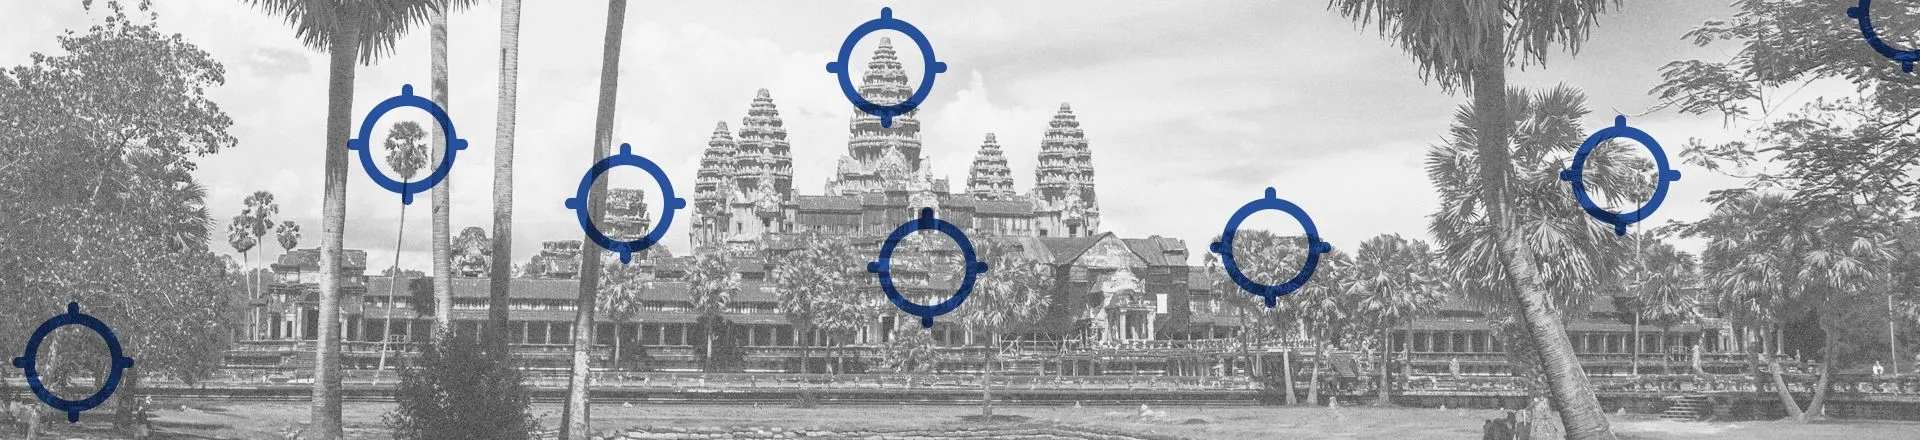 New APT32 Malware Campaign Targets Cambodian Government